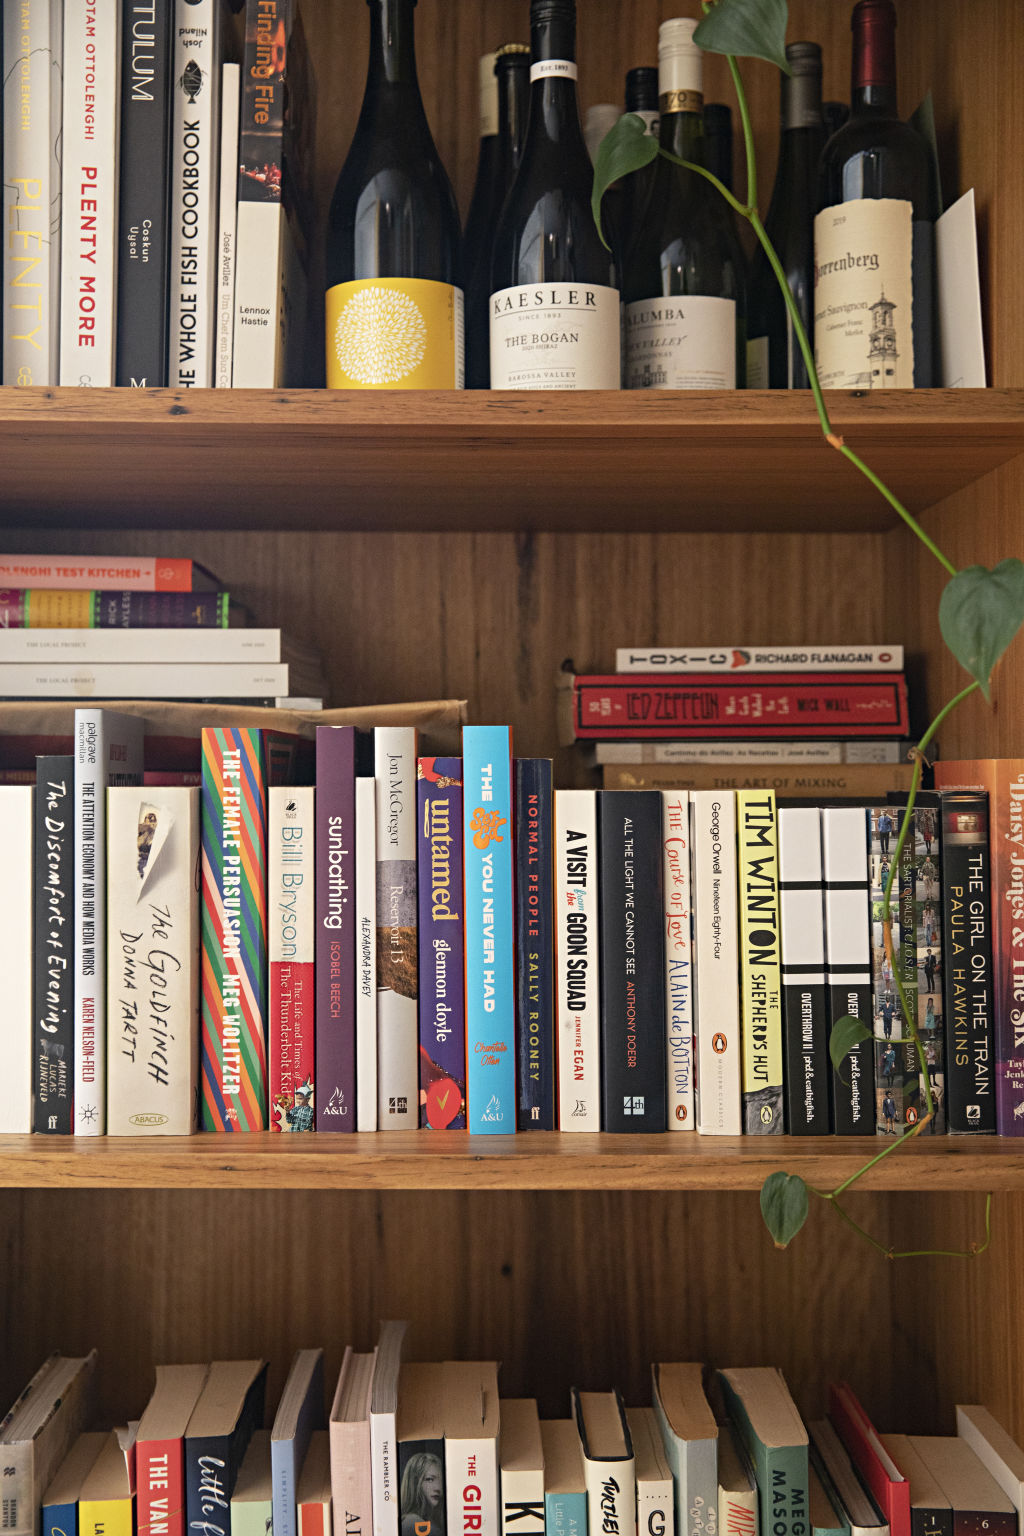 The home is accented with many purchases from abroad, including vases, wine and plenty of books. Photo: Natalie Jeffcott